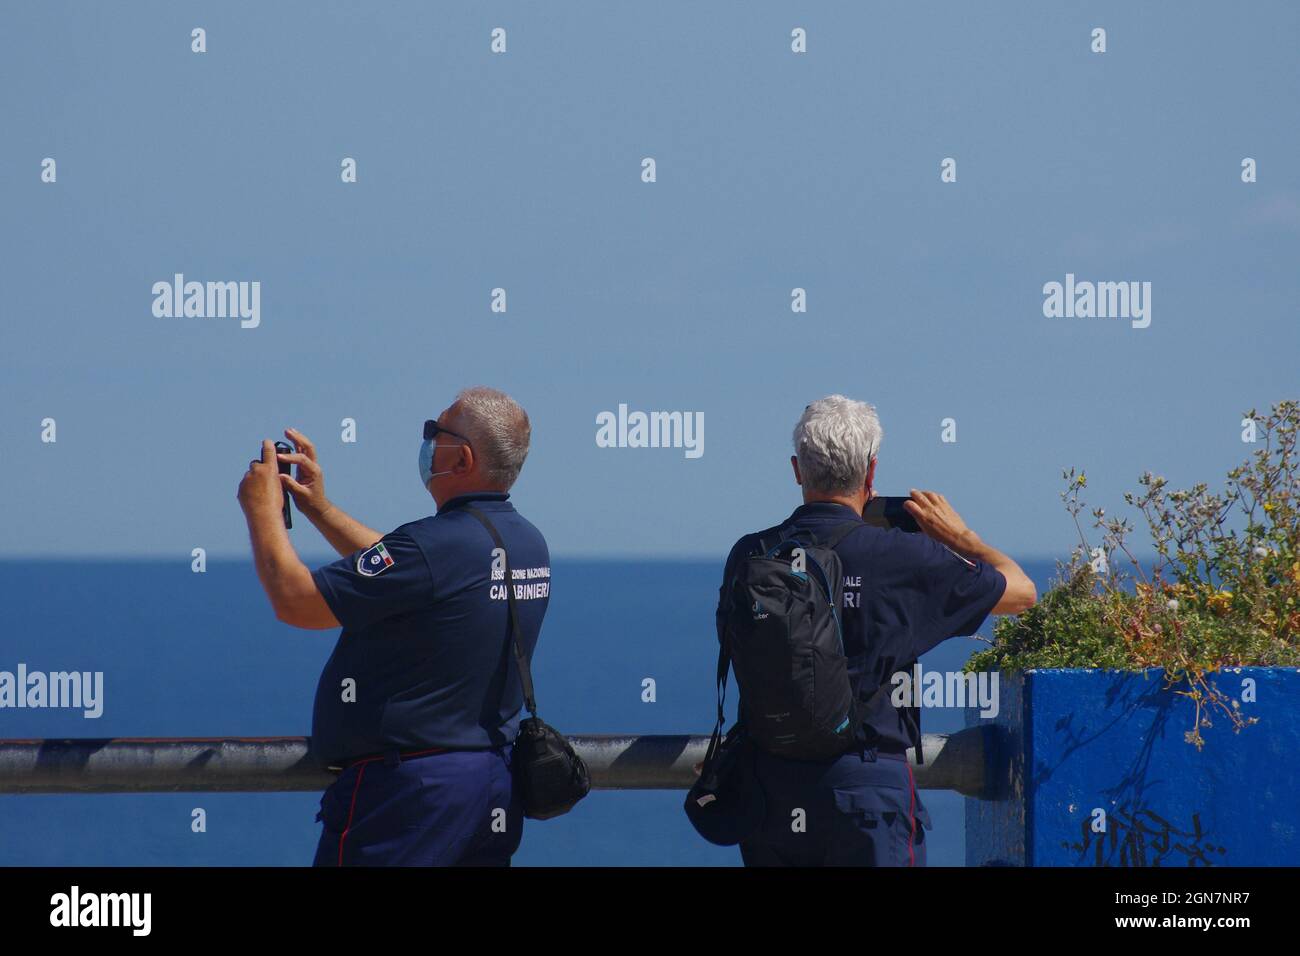 Termoli - Molise - 14 May 2021 - Two members of the National Carabinieri Association photograph the sea with their mobile phones on a warm May day Stock Photo